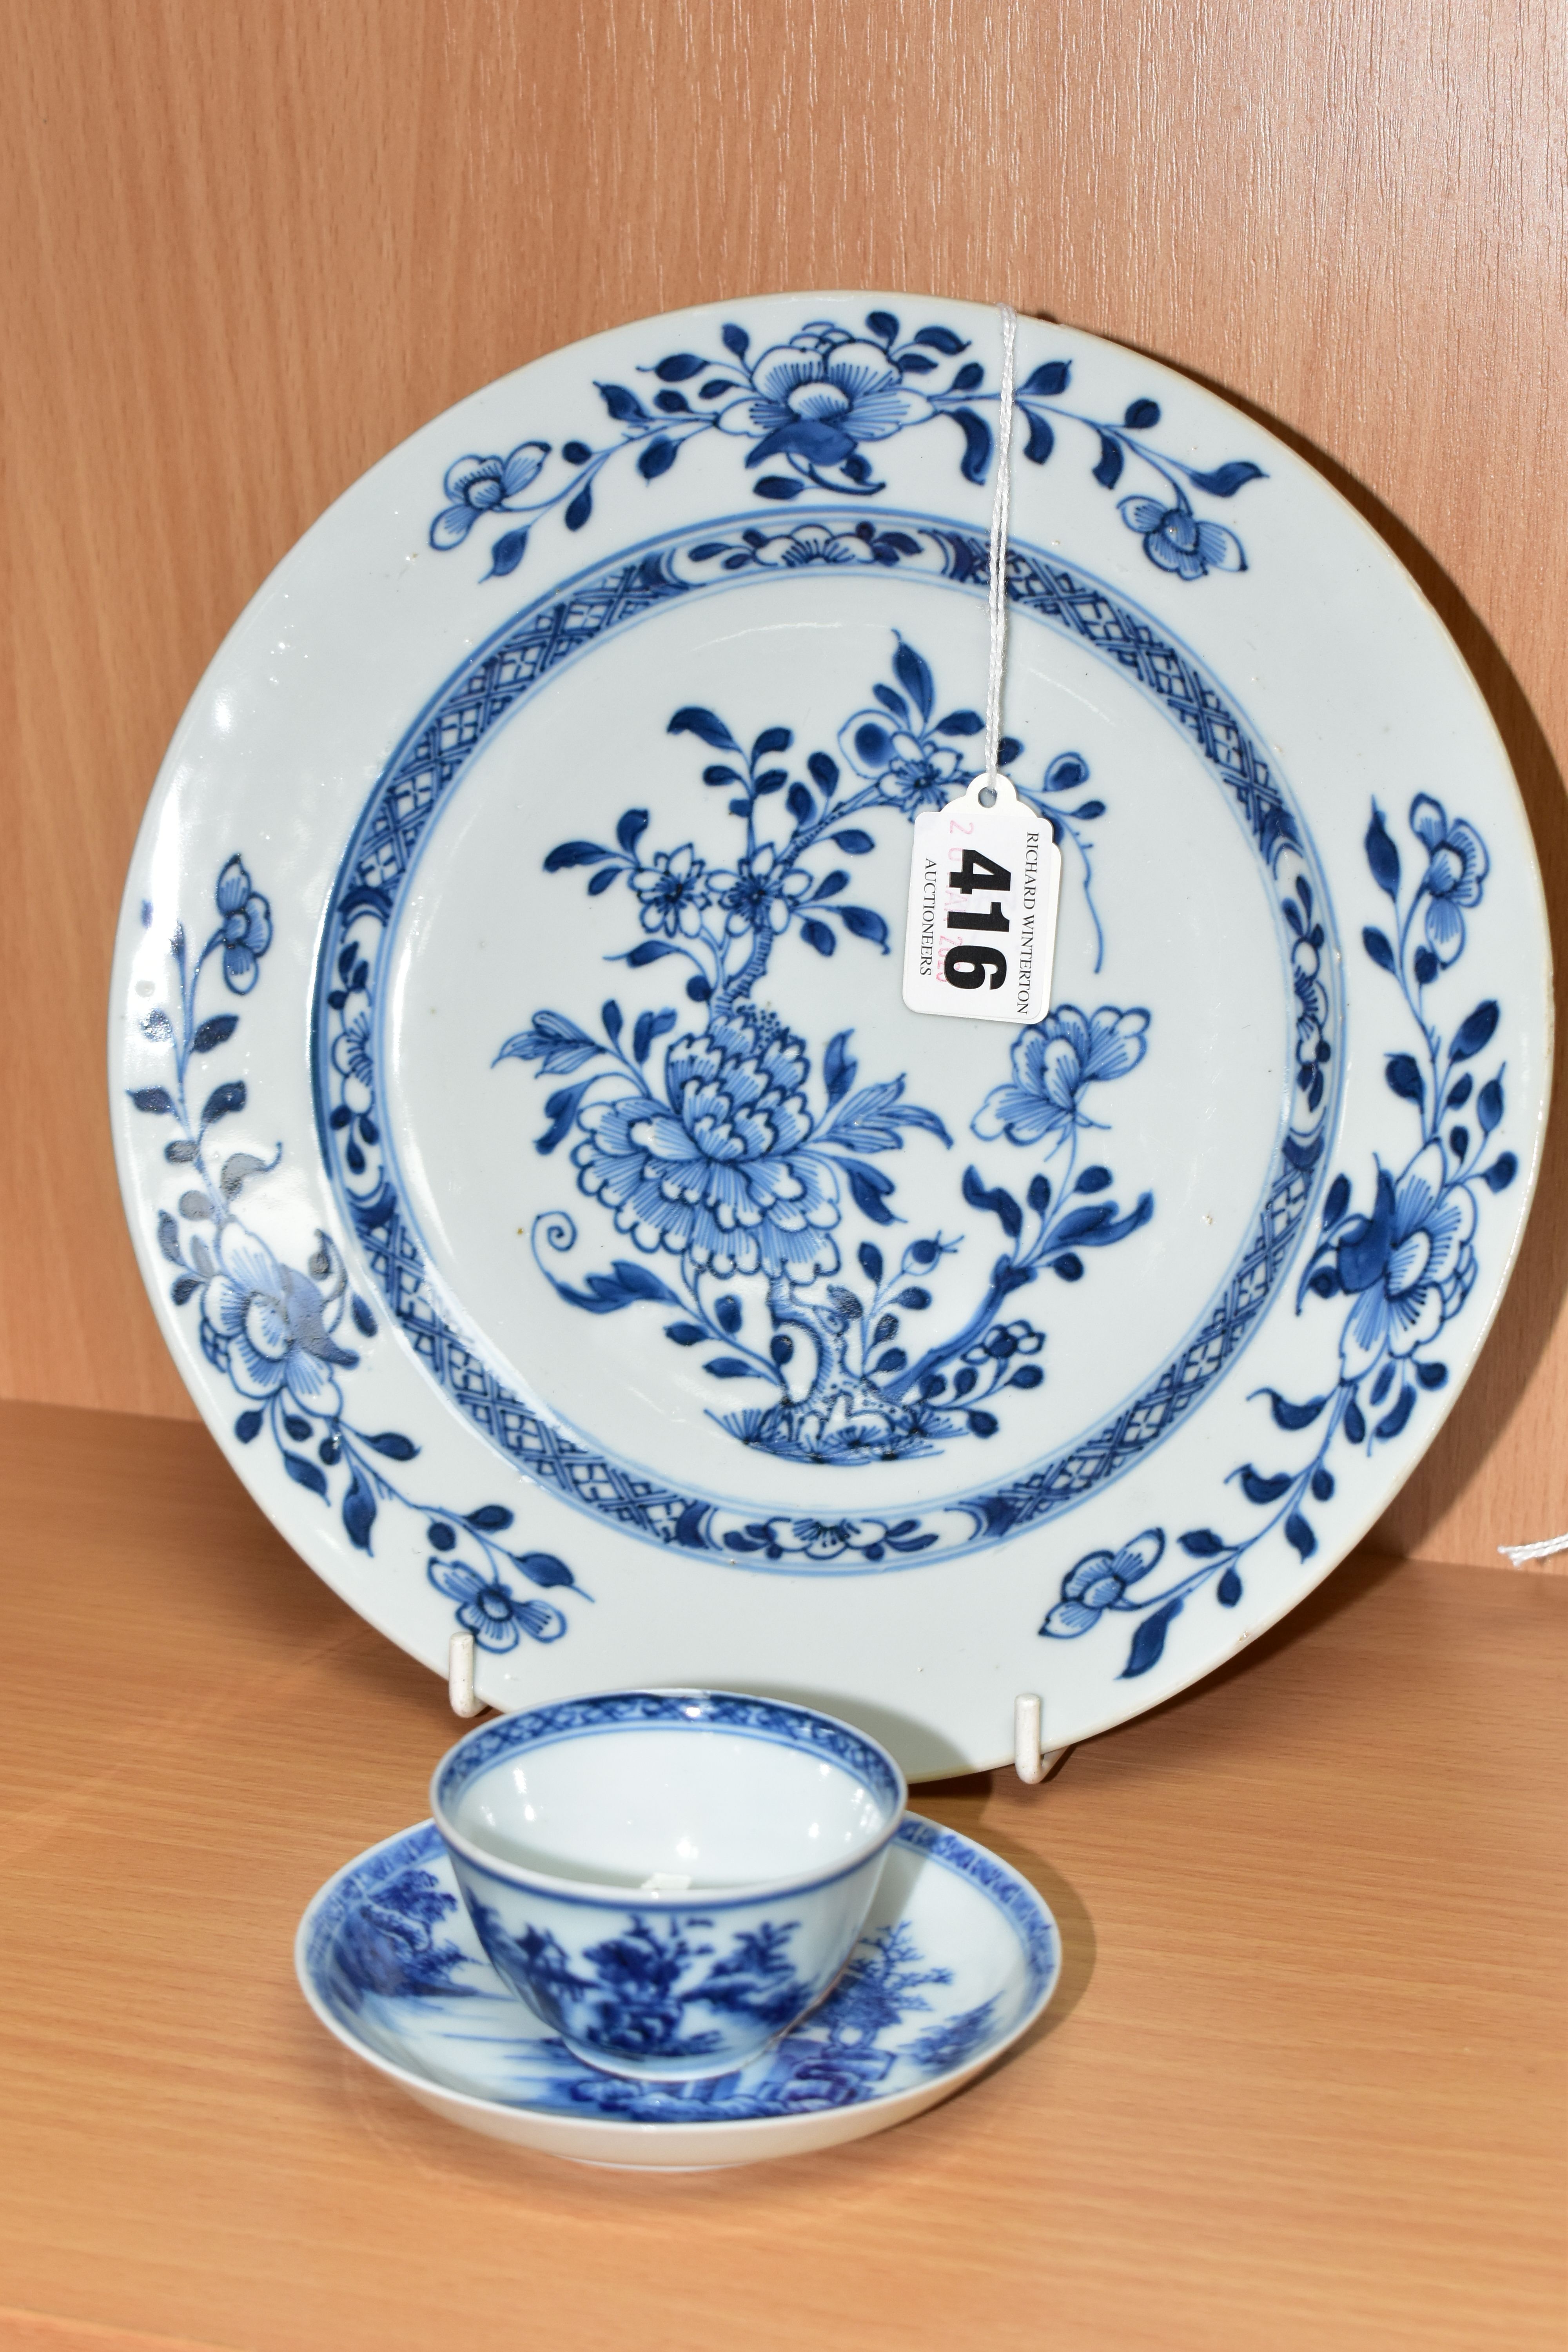 A 'THE NANKING CARGO' BLUE AND WHITE PORCELAIN TEA BOWL, SAUCER AND PLATE, the tea bowl and saucer